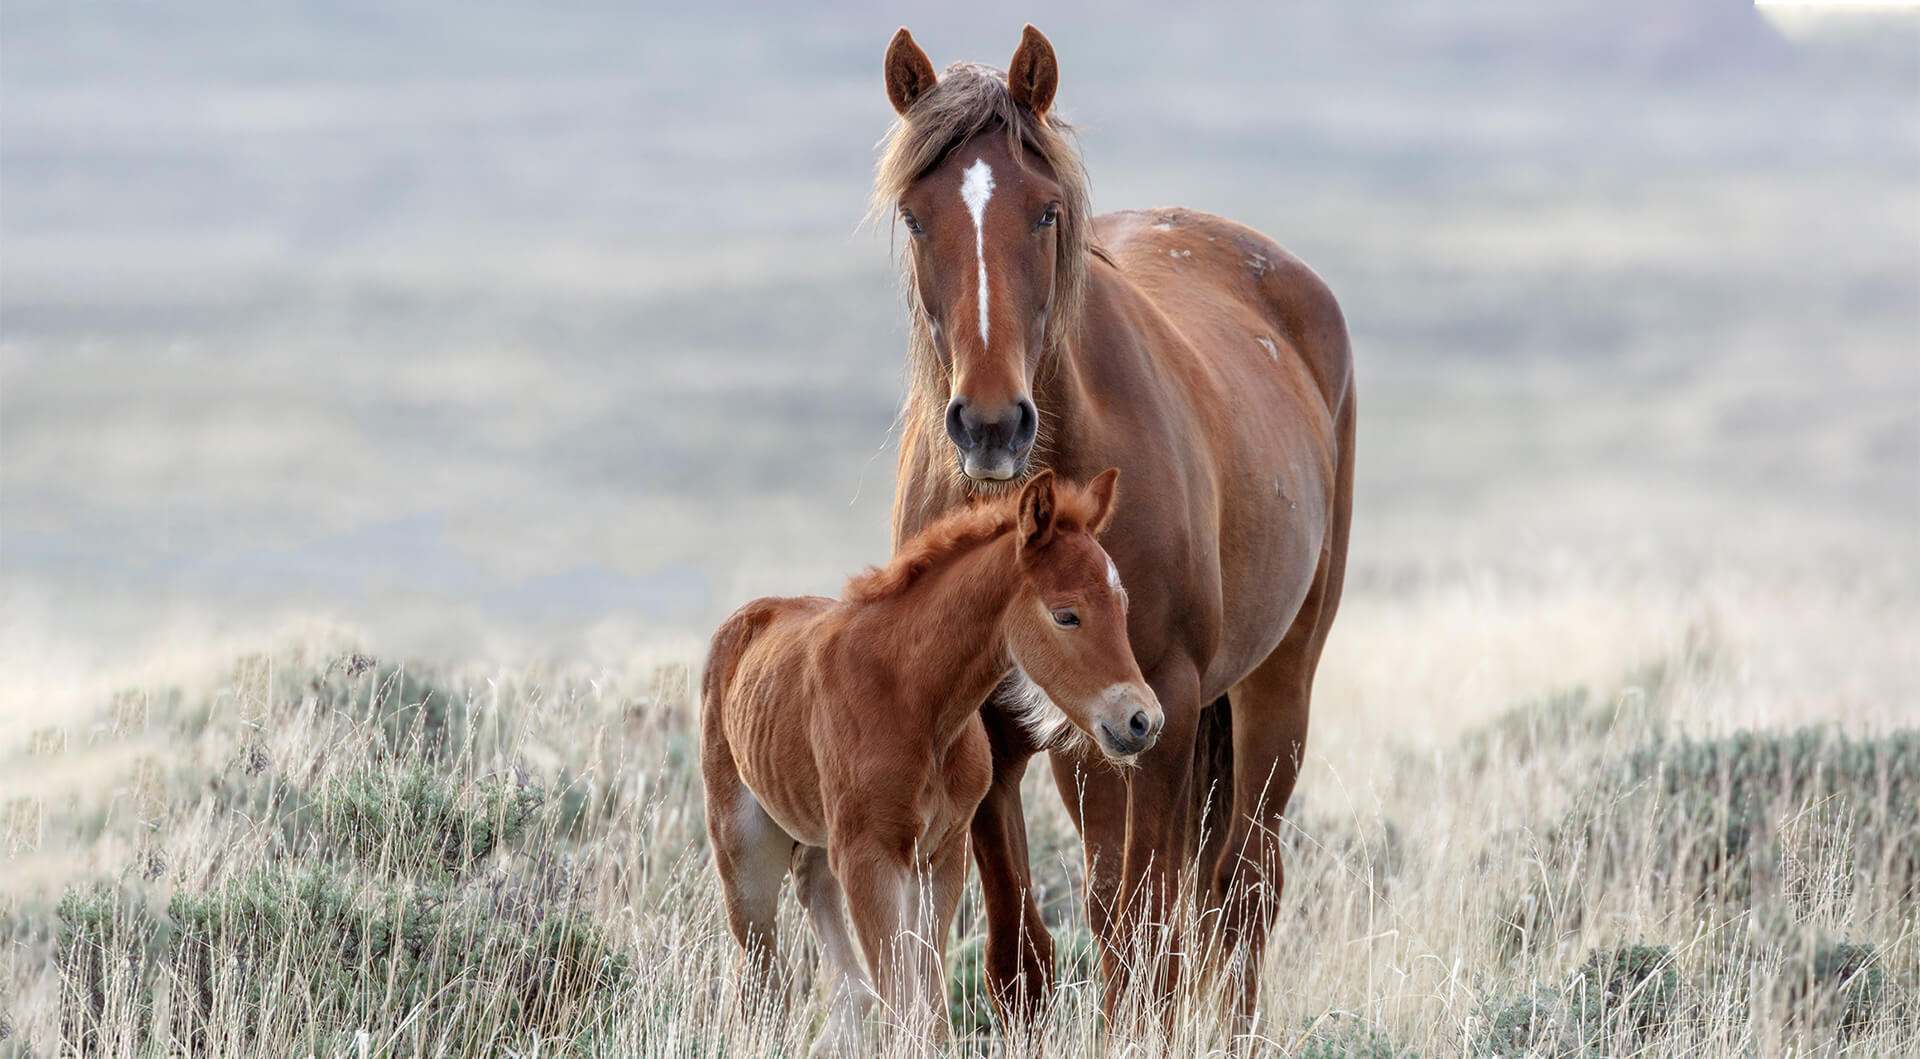 Wild horse with young horse